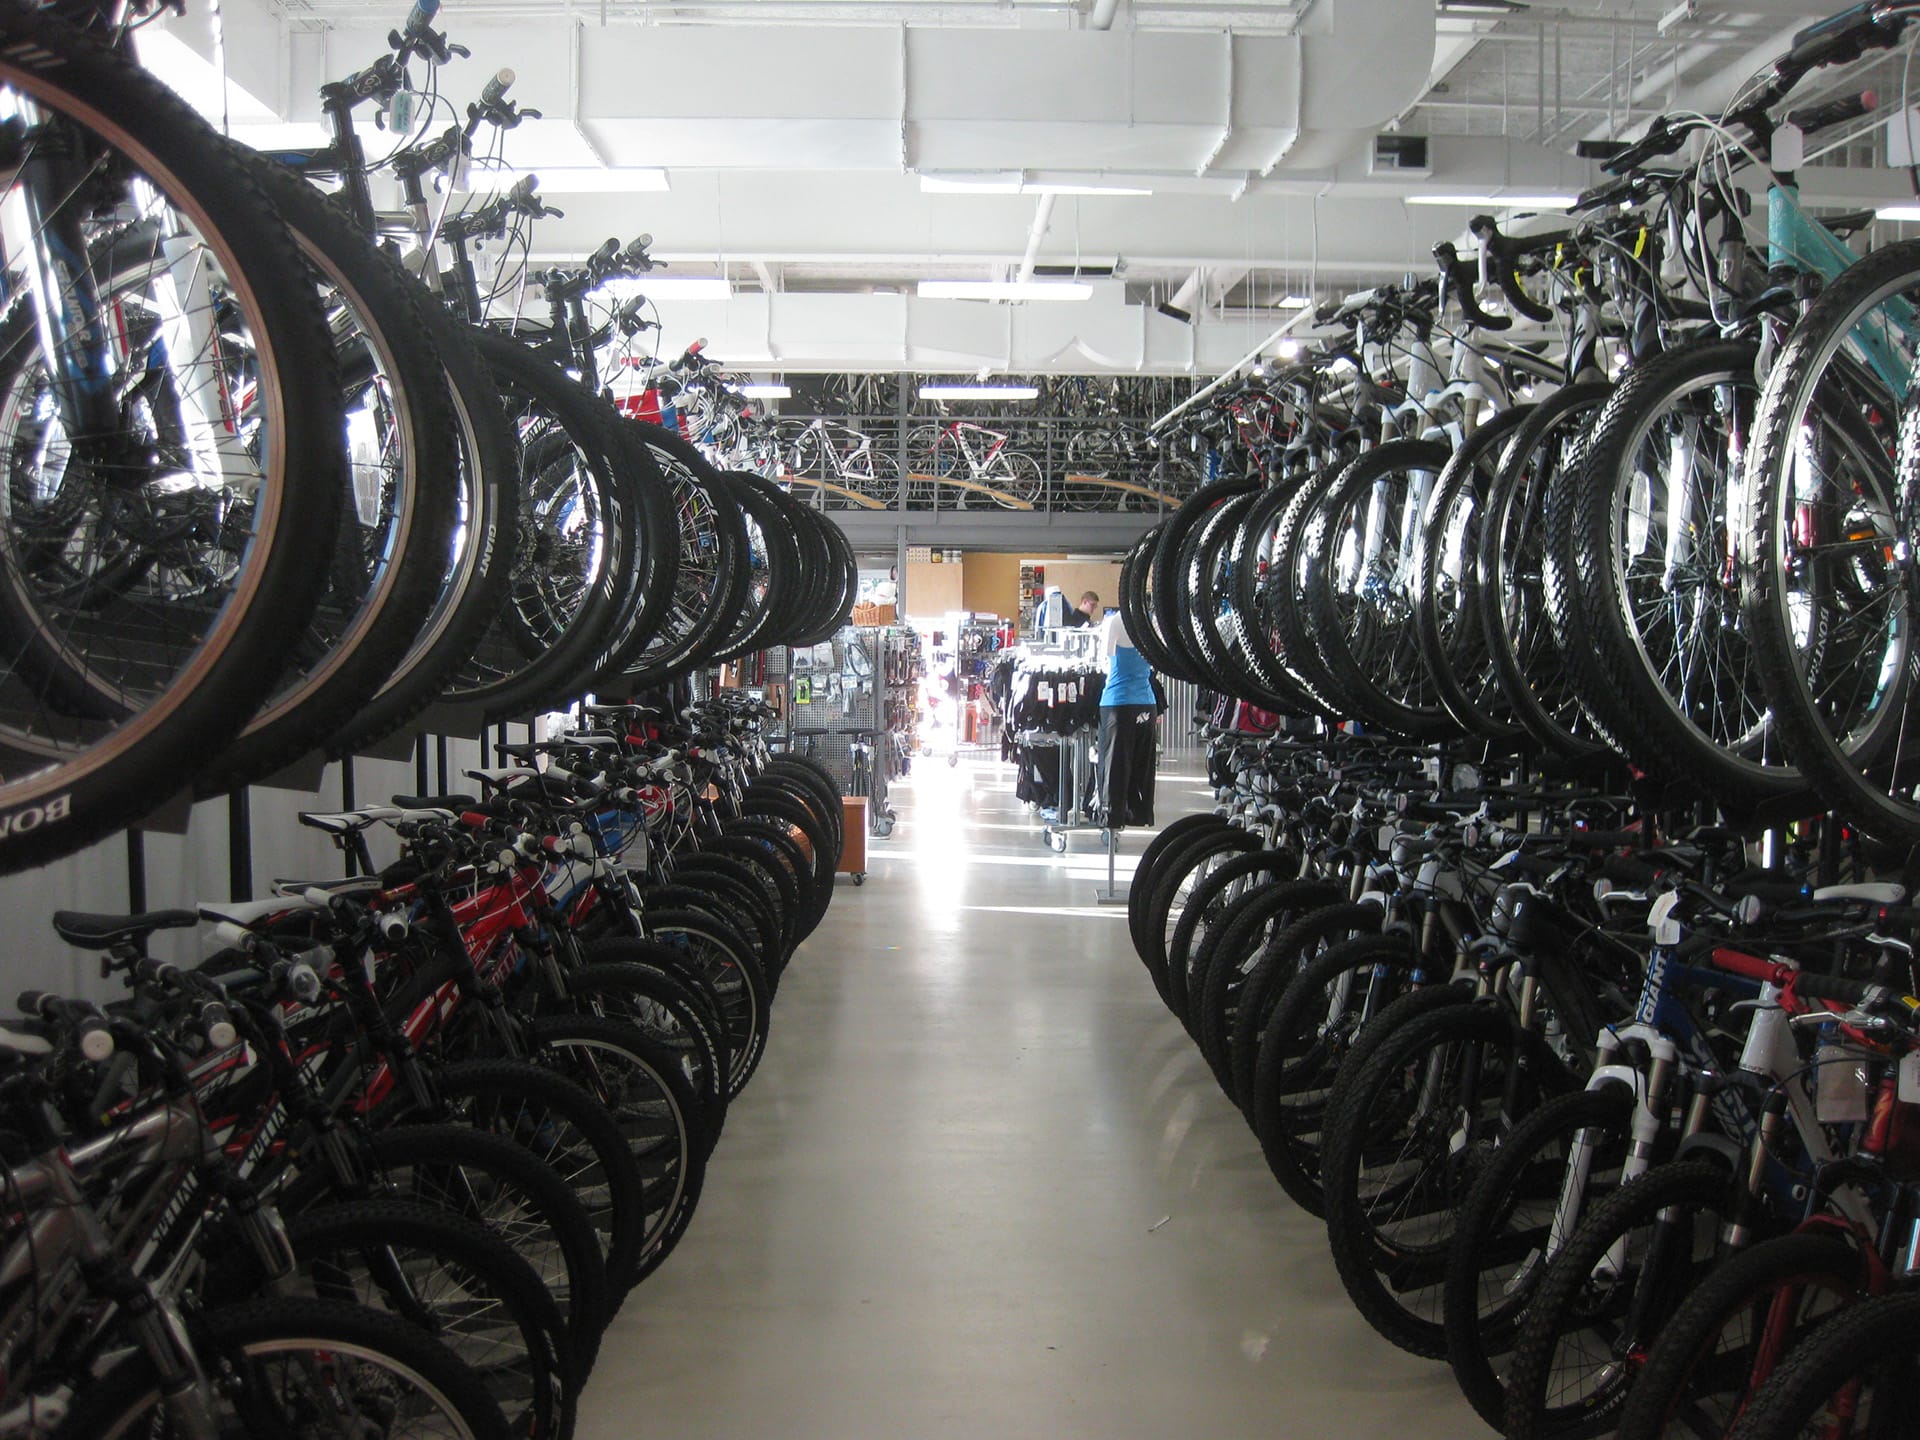 Aisle of a bike shop. Two rows of bikes, one on top of the other, line both sides of the aisle.